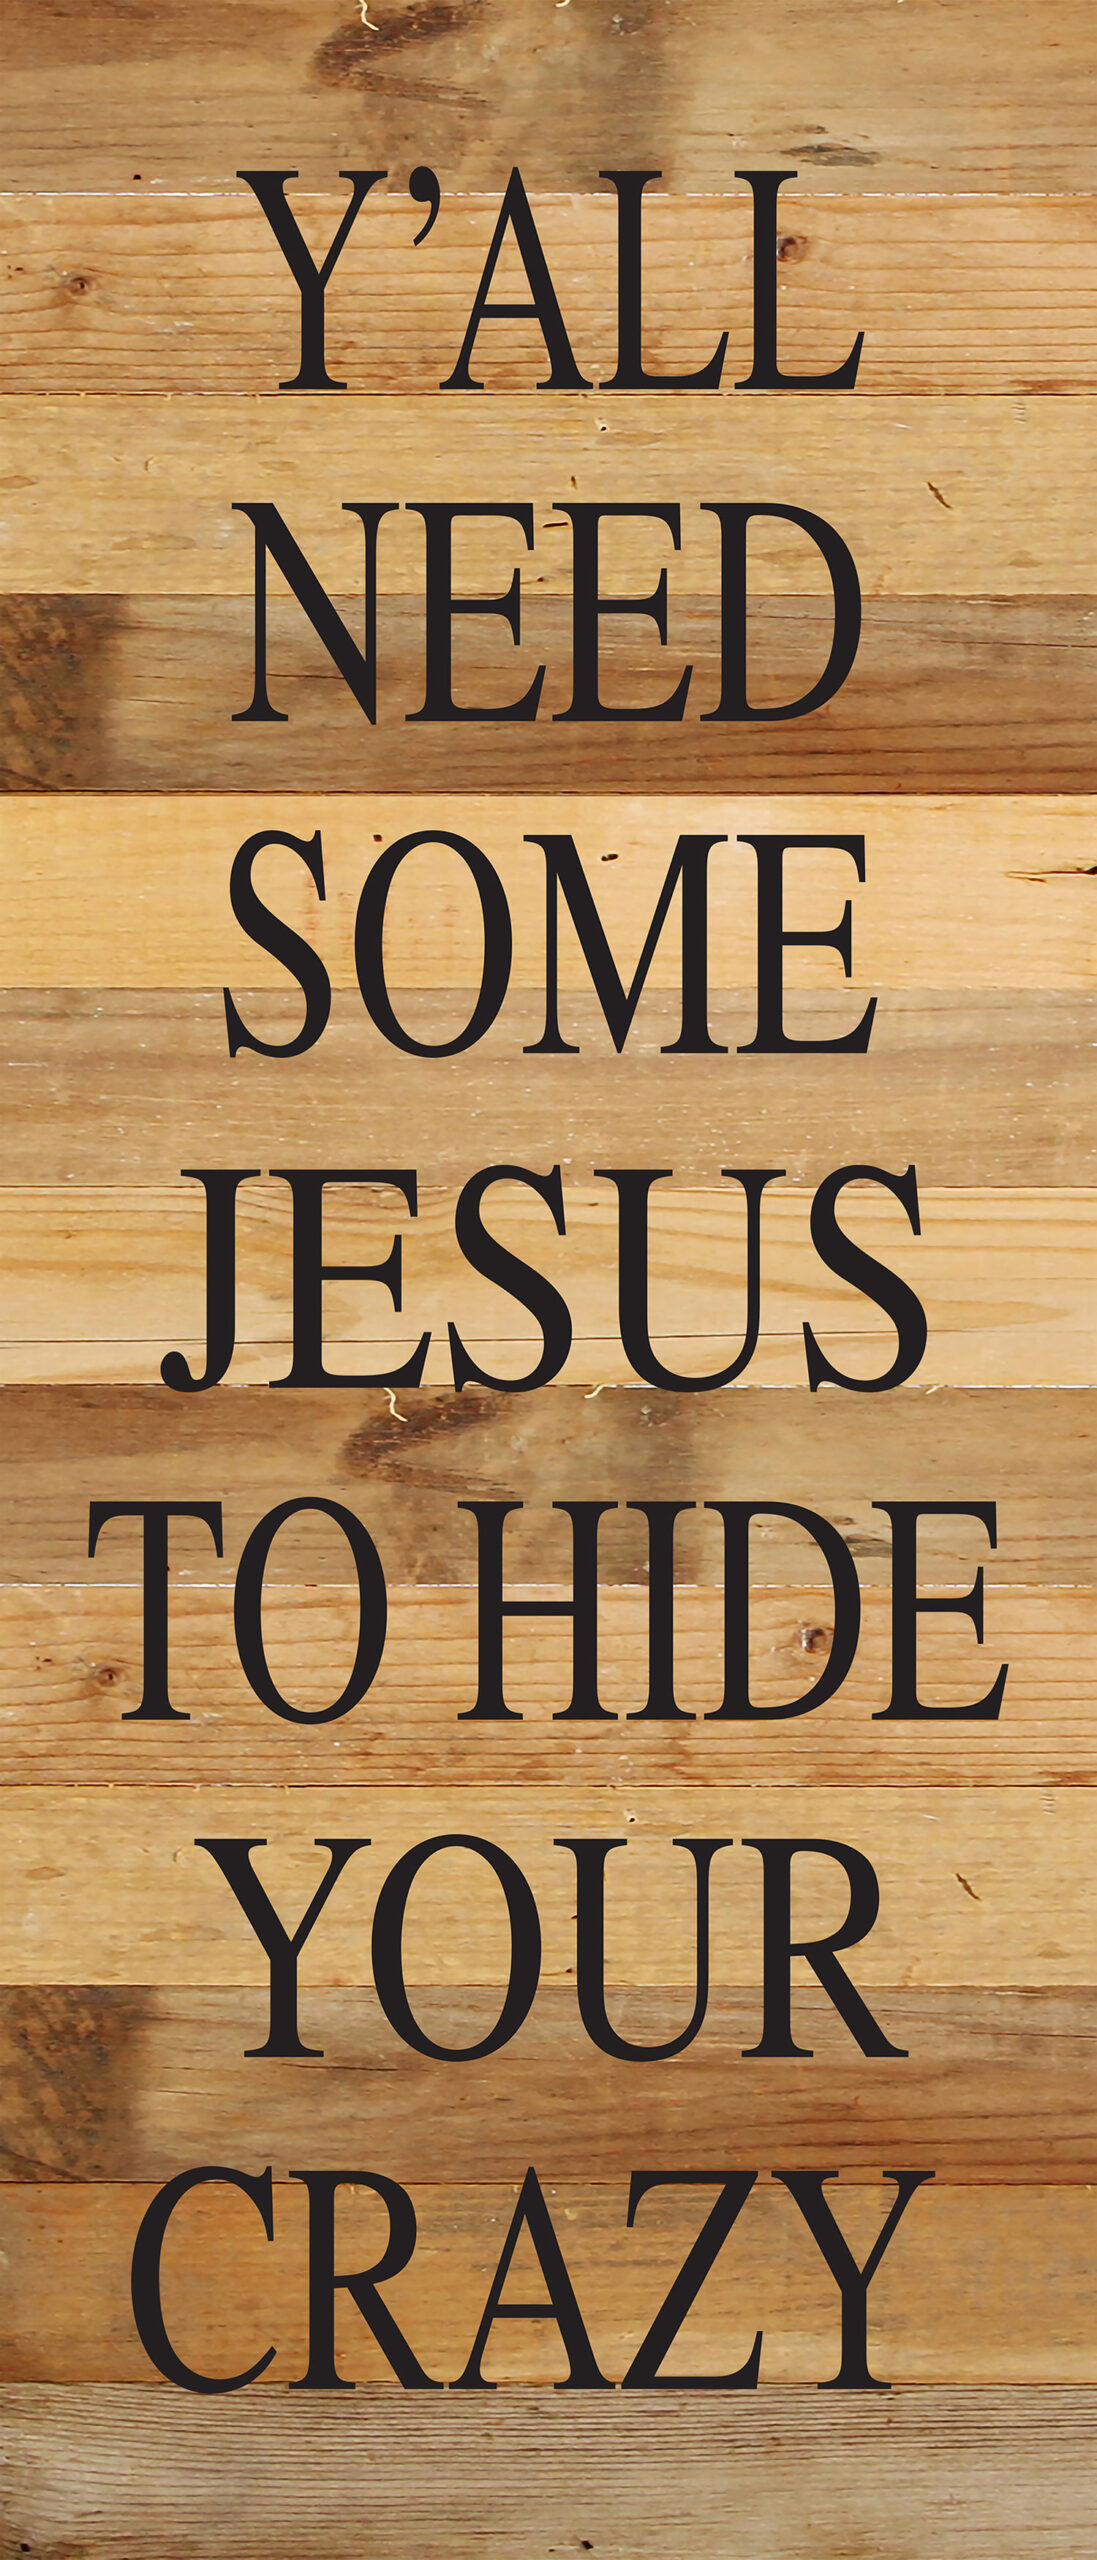 Y'all need some Jesus to hide your crazy. / 6"x14" Reclaimed Wood Sign